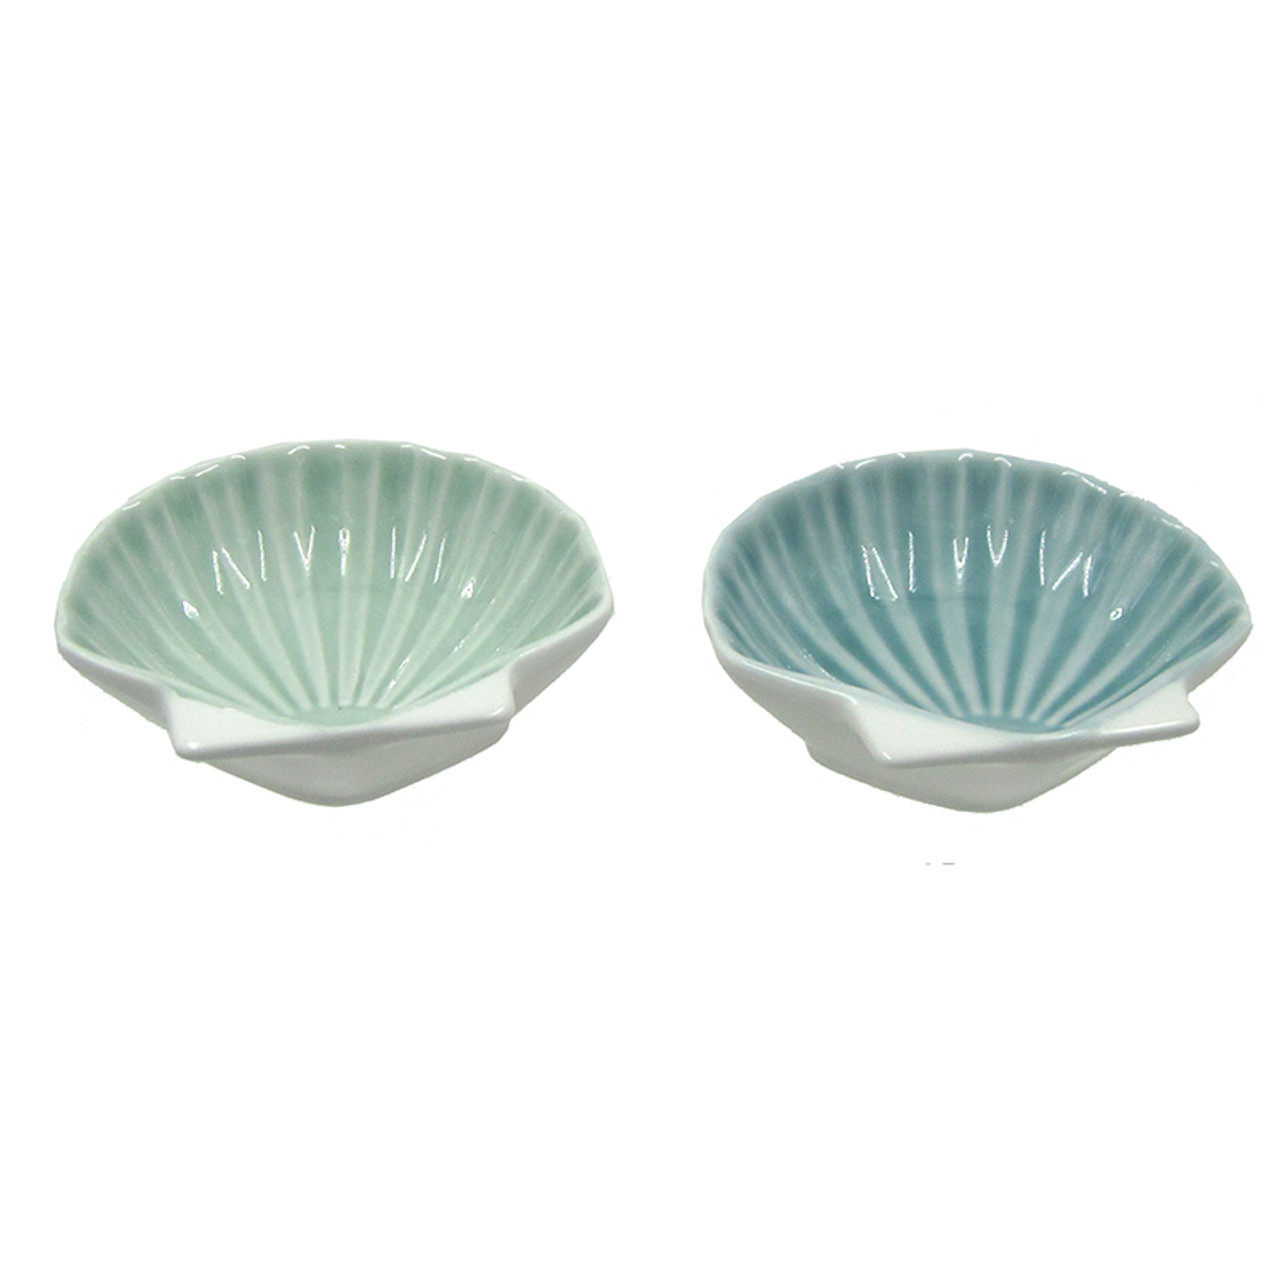 https://cdn11.bigcommerce.com/s-36f60/images/stencil/1280x1280/products/6032/11766/69108-scallop-bowls__39732.1620148283.jpg?c=2?imbypass=on